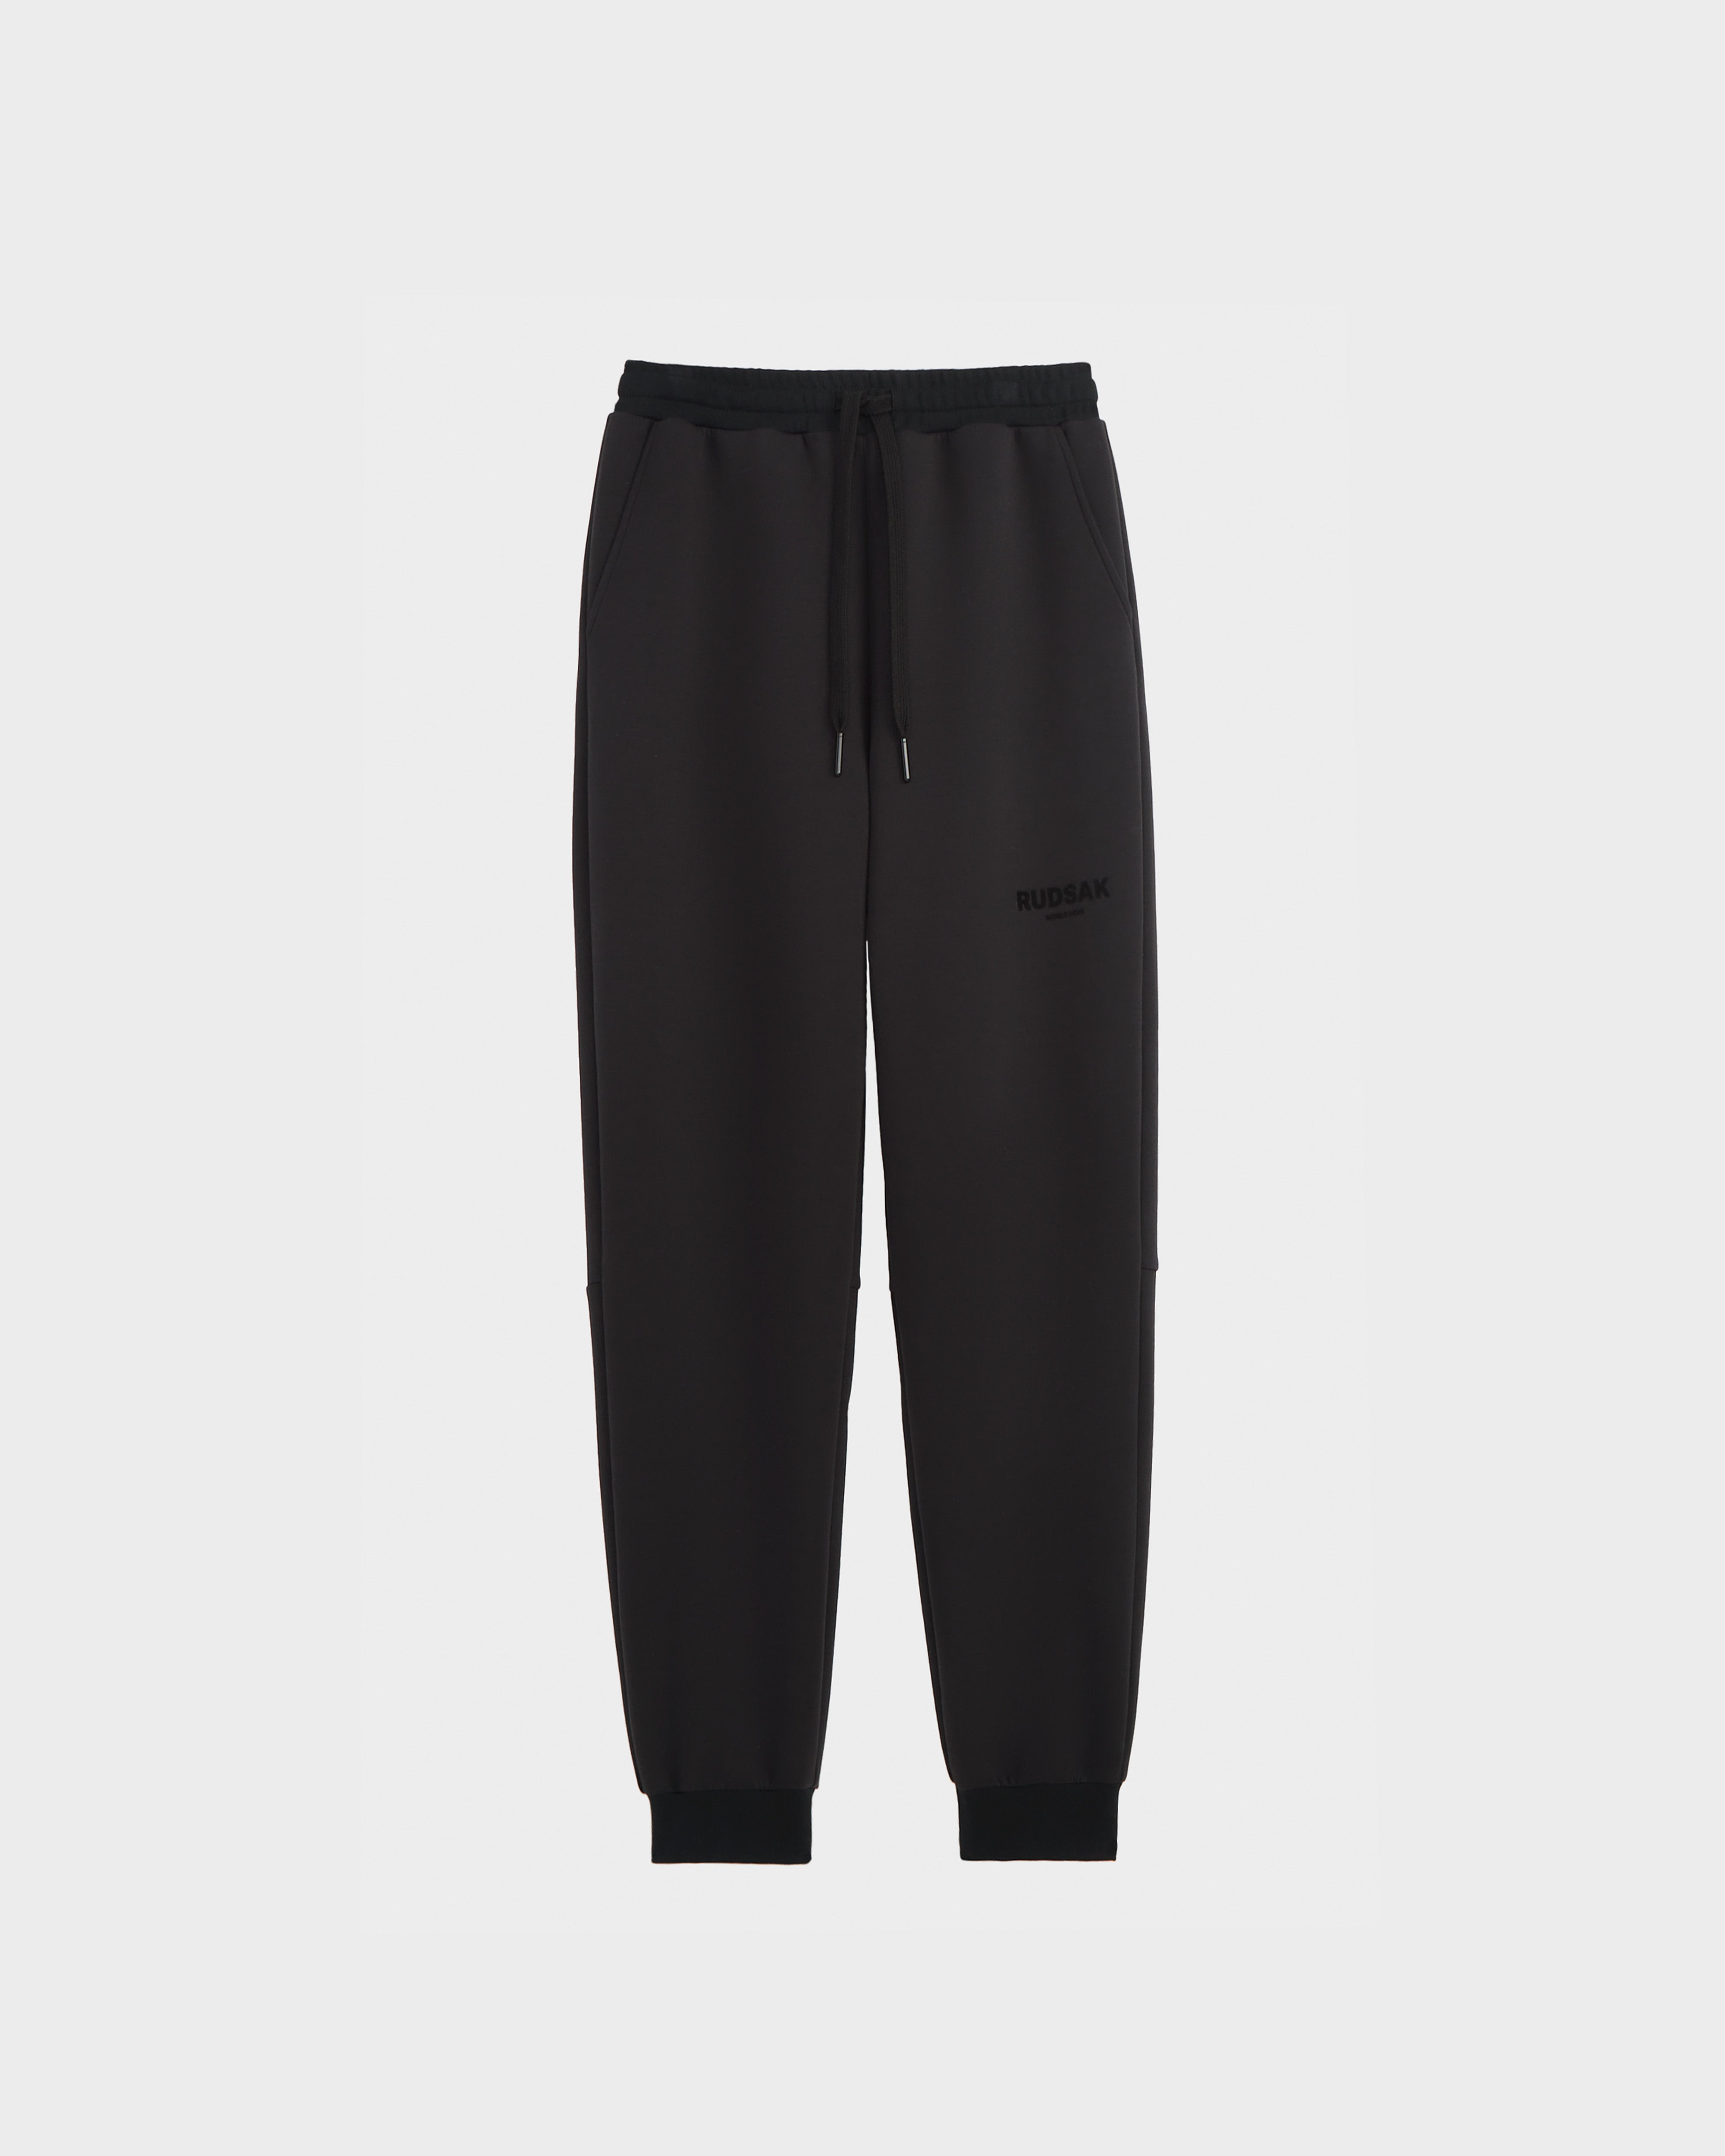 Women's Black Recycled Oversized Joggers